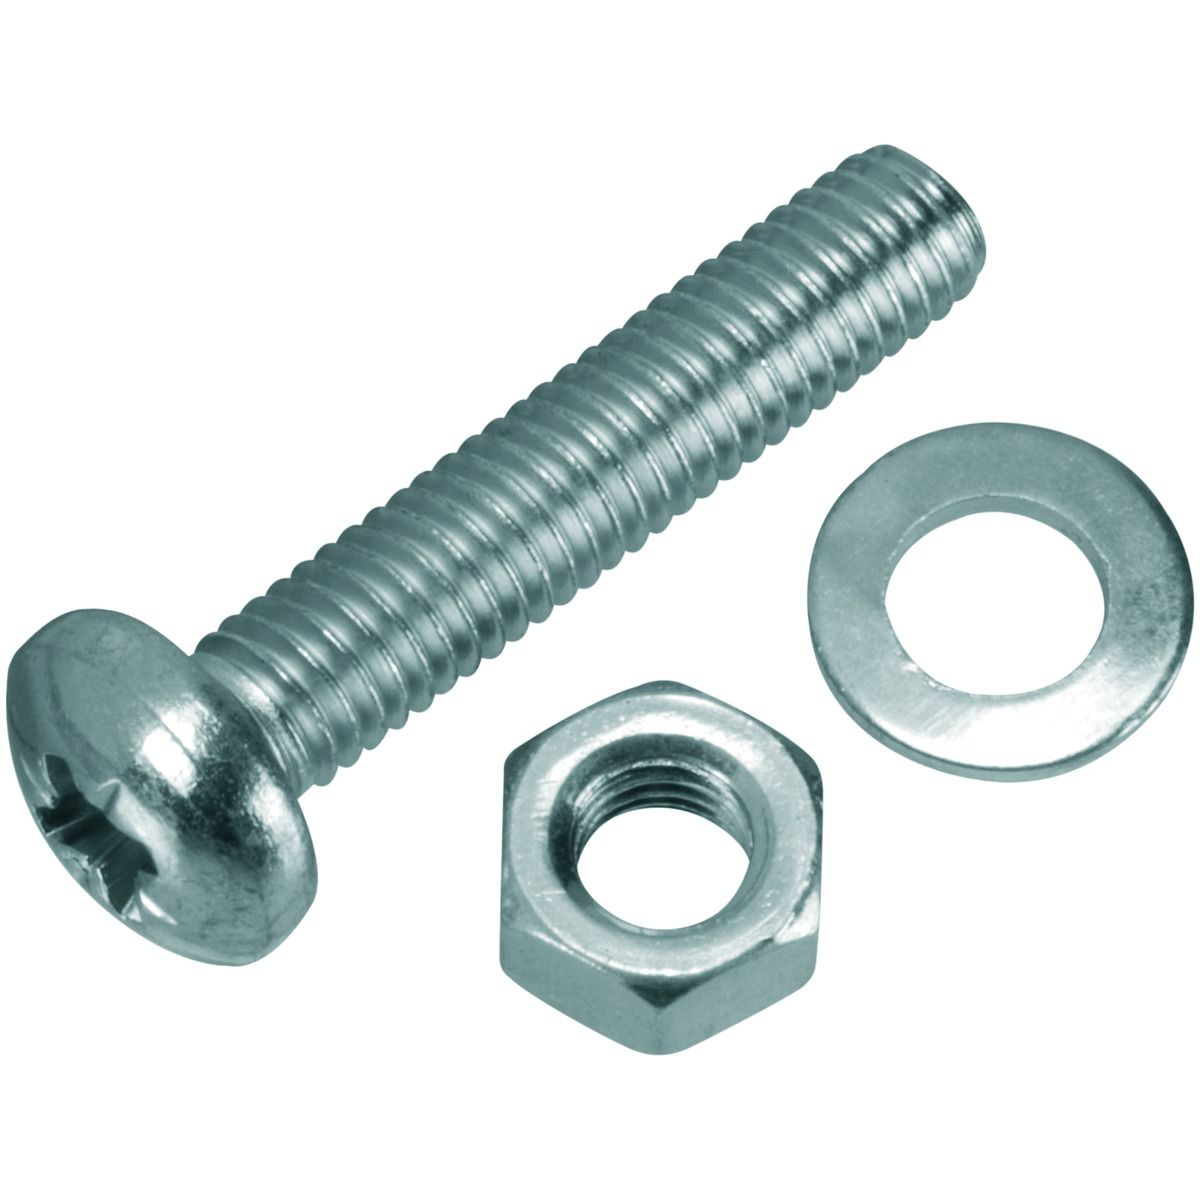 Image of Wickes Machine Screws with Pozi Head, Nut & Washer - M5 x 25mm Pack of 8